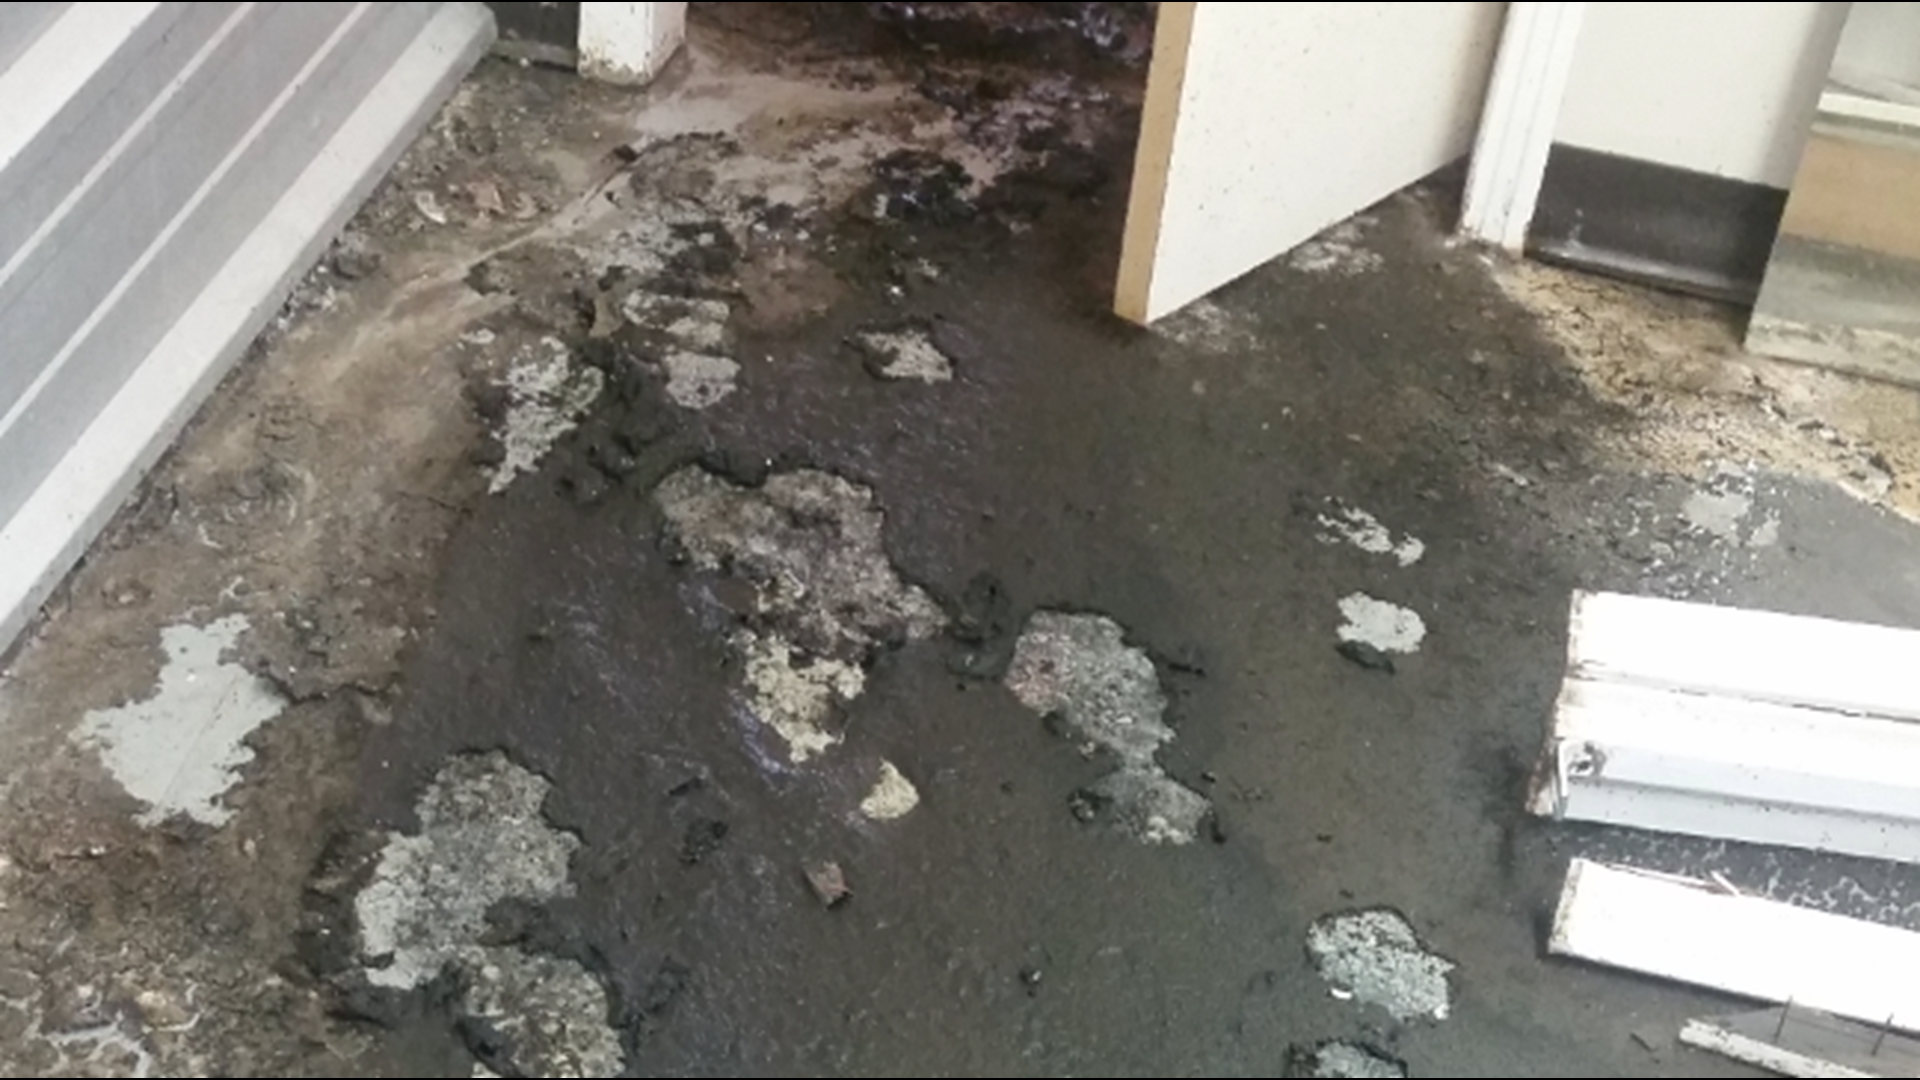 Dorian Clawson said he has been remodeling a building in Mart for months, only to see his first floor suddenly covered in sewer waste. 6 News is investigating.